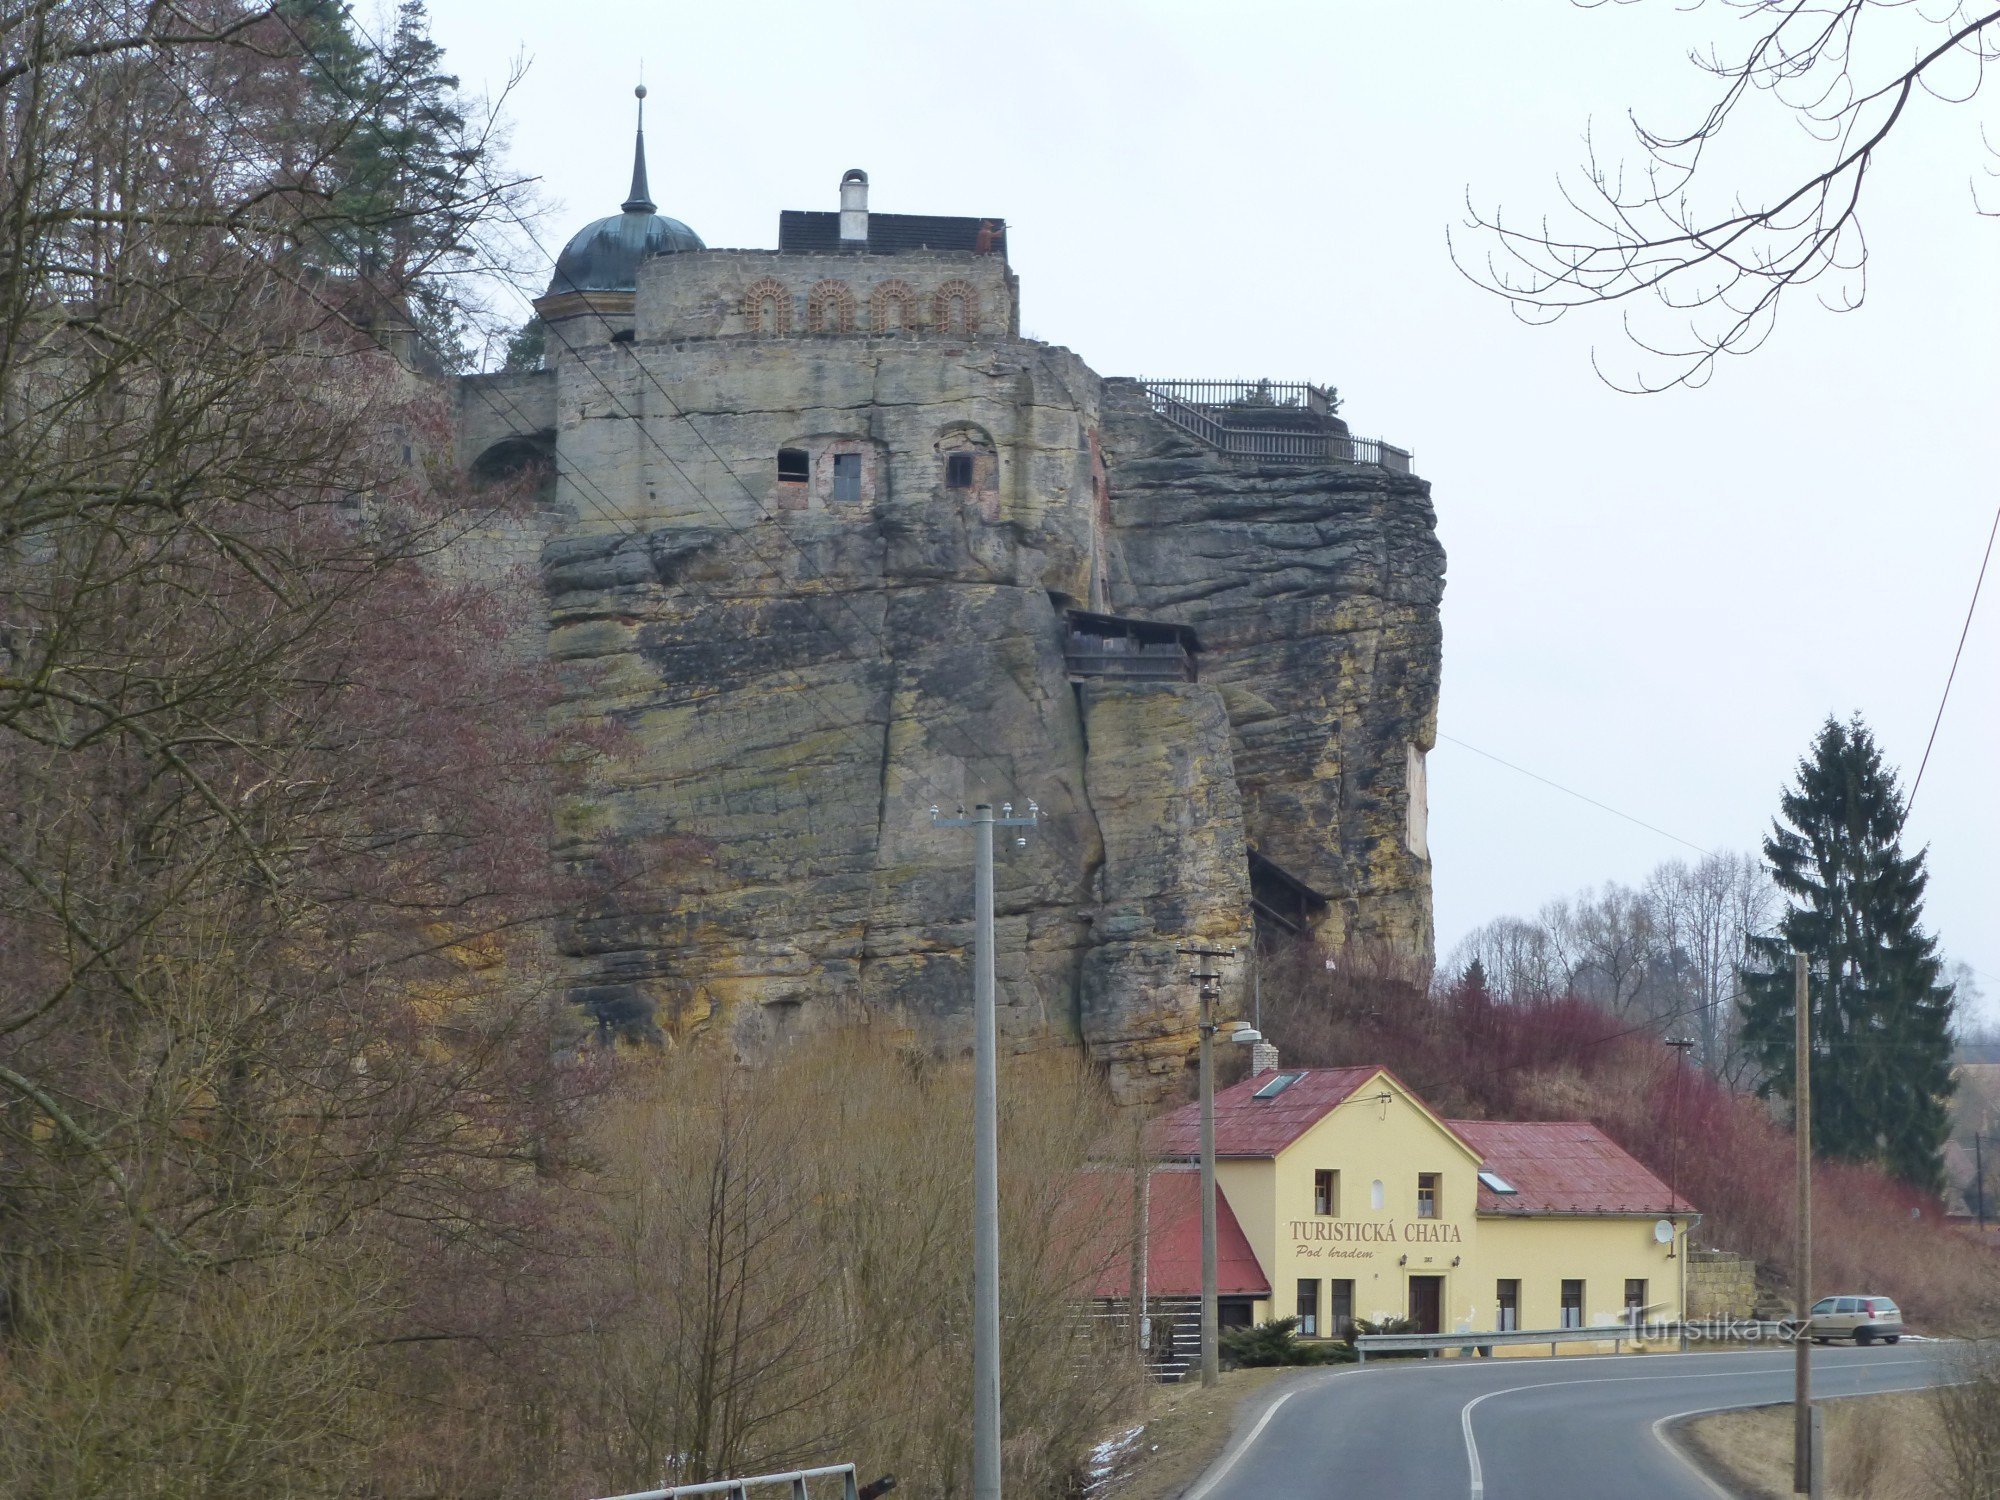 on the way to the top, the rock castle in Sloup in Bohemia